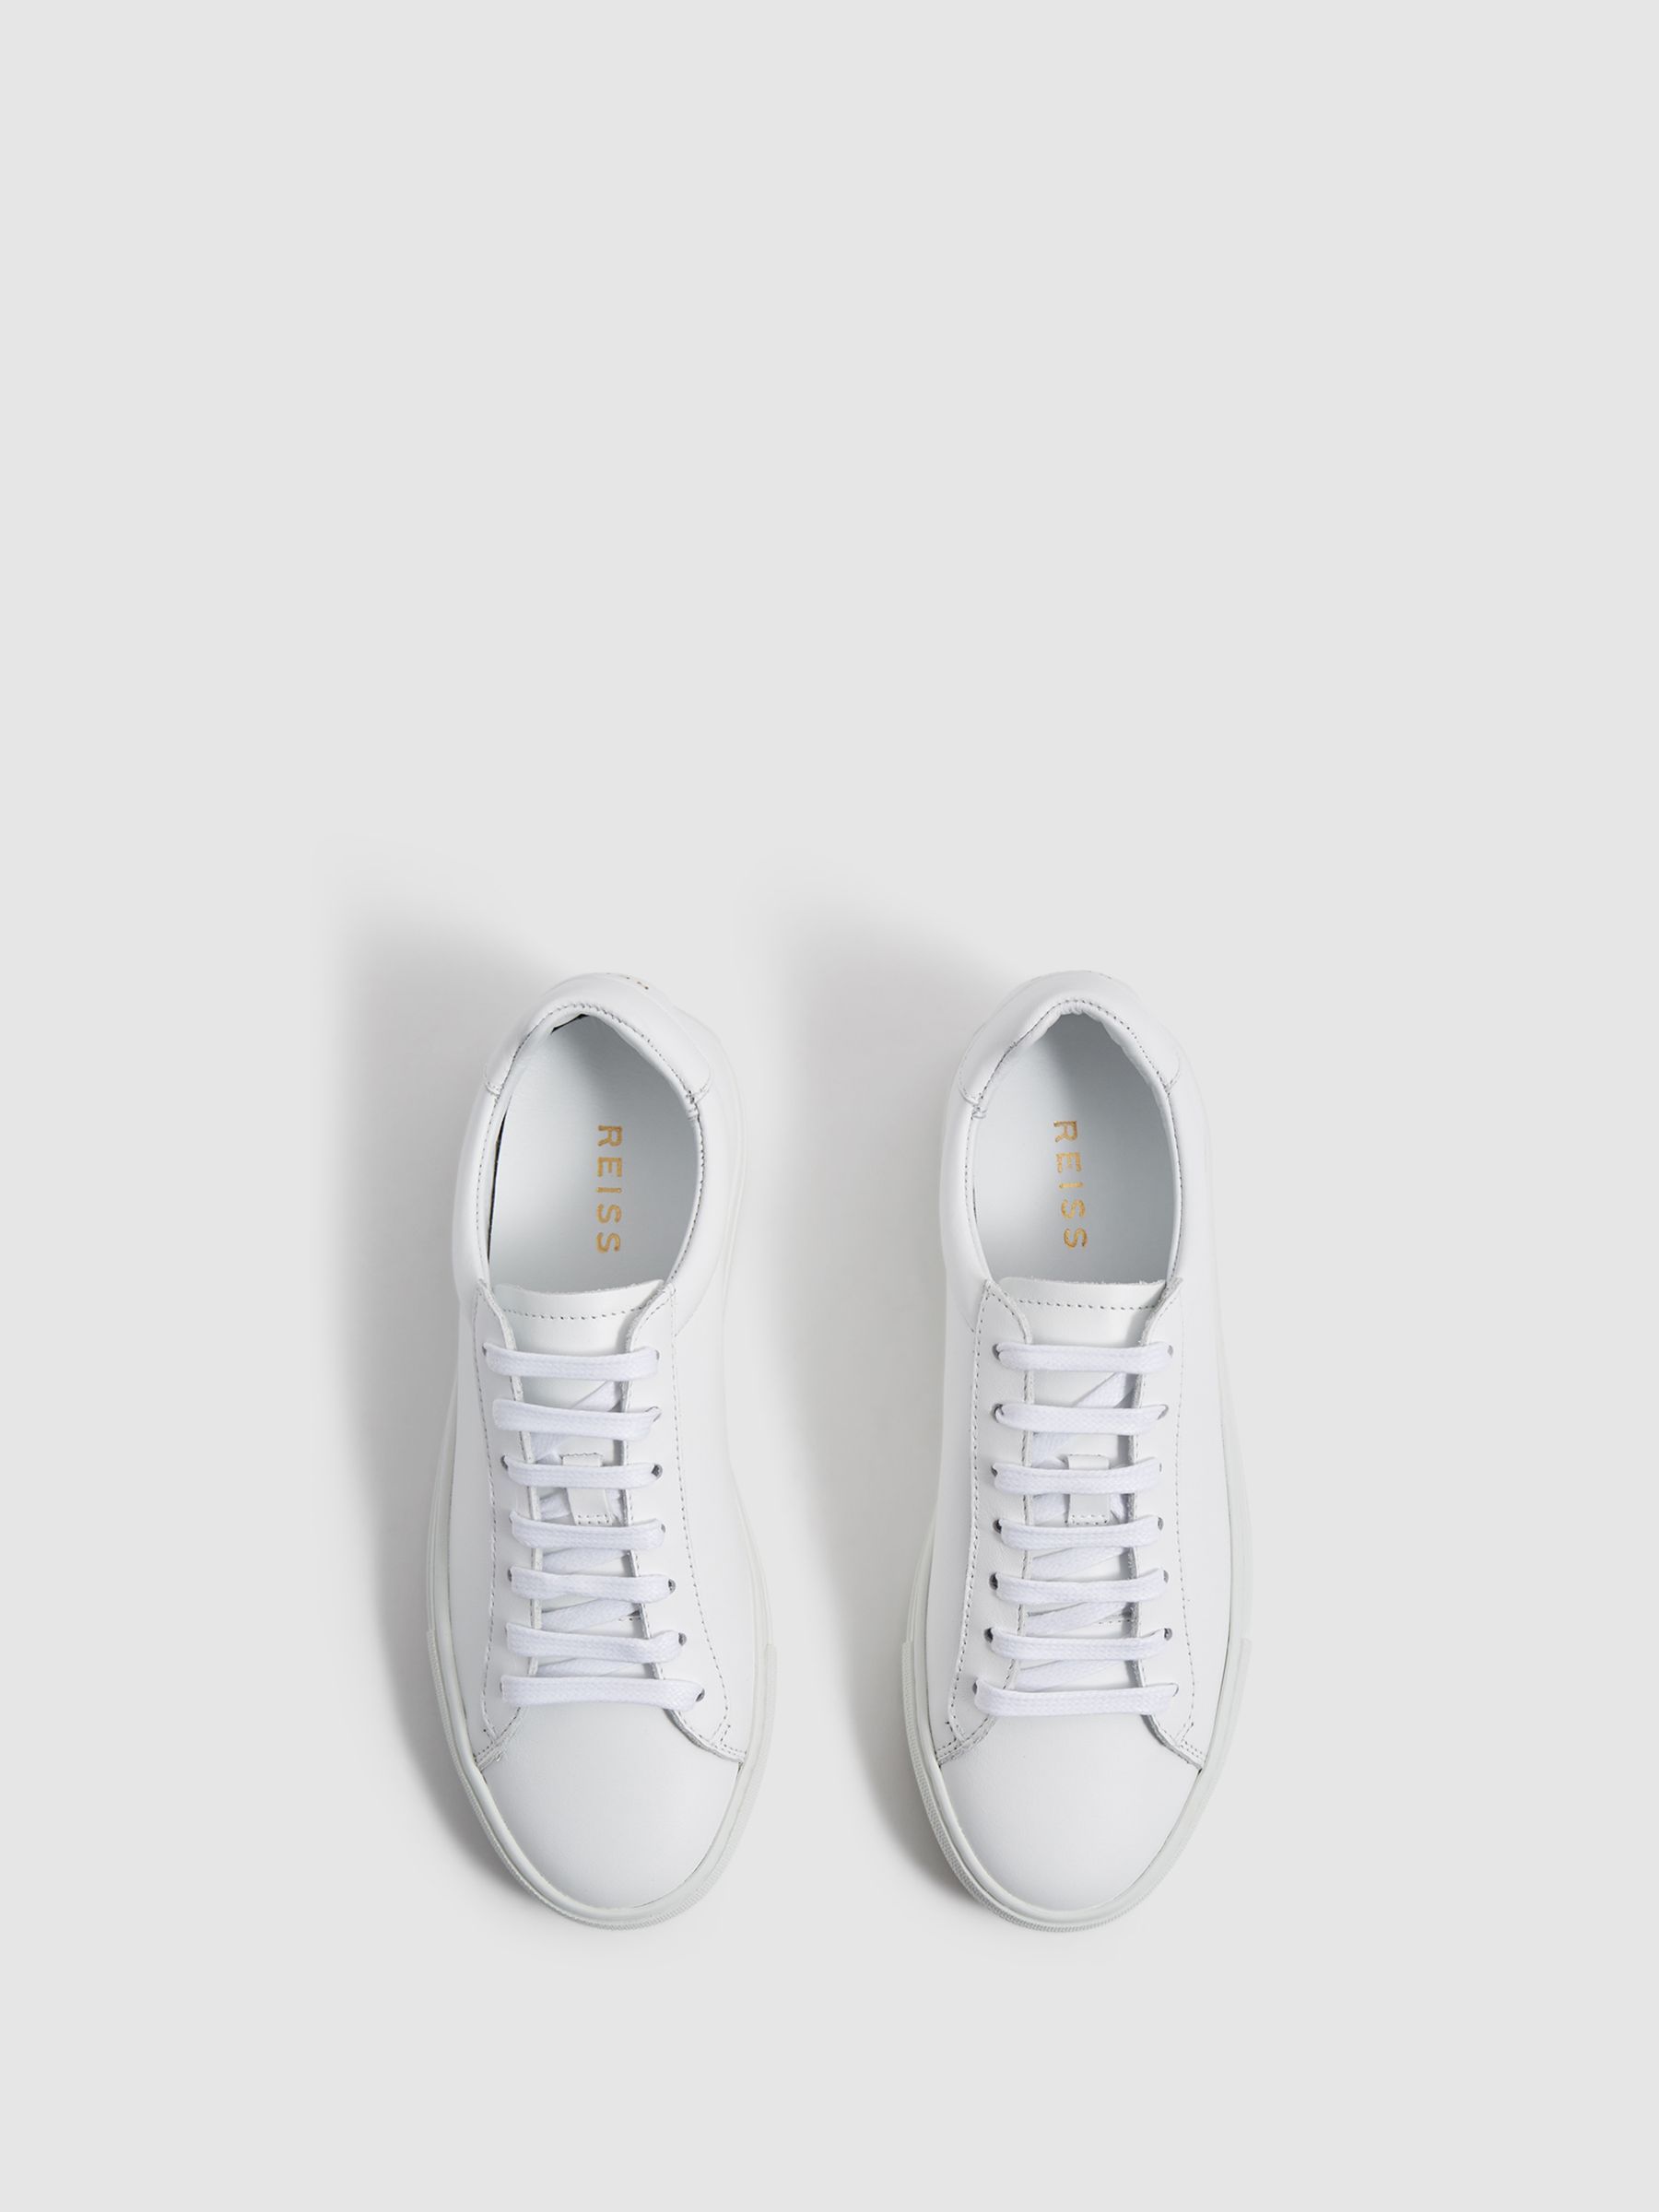 Reiss Finley Lace Up Leather Trainers - REISS